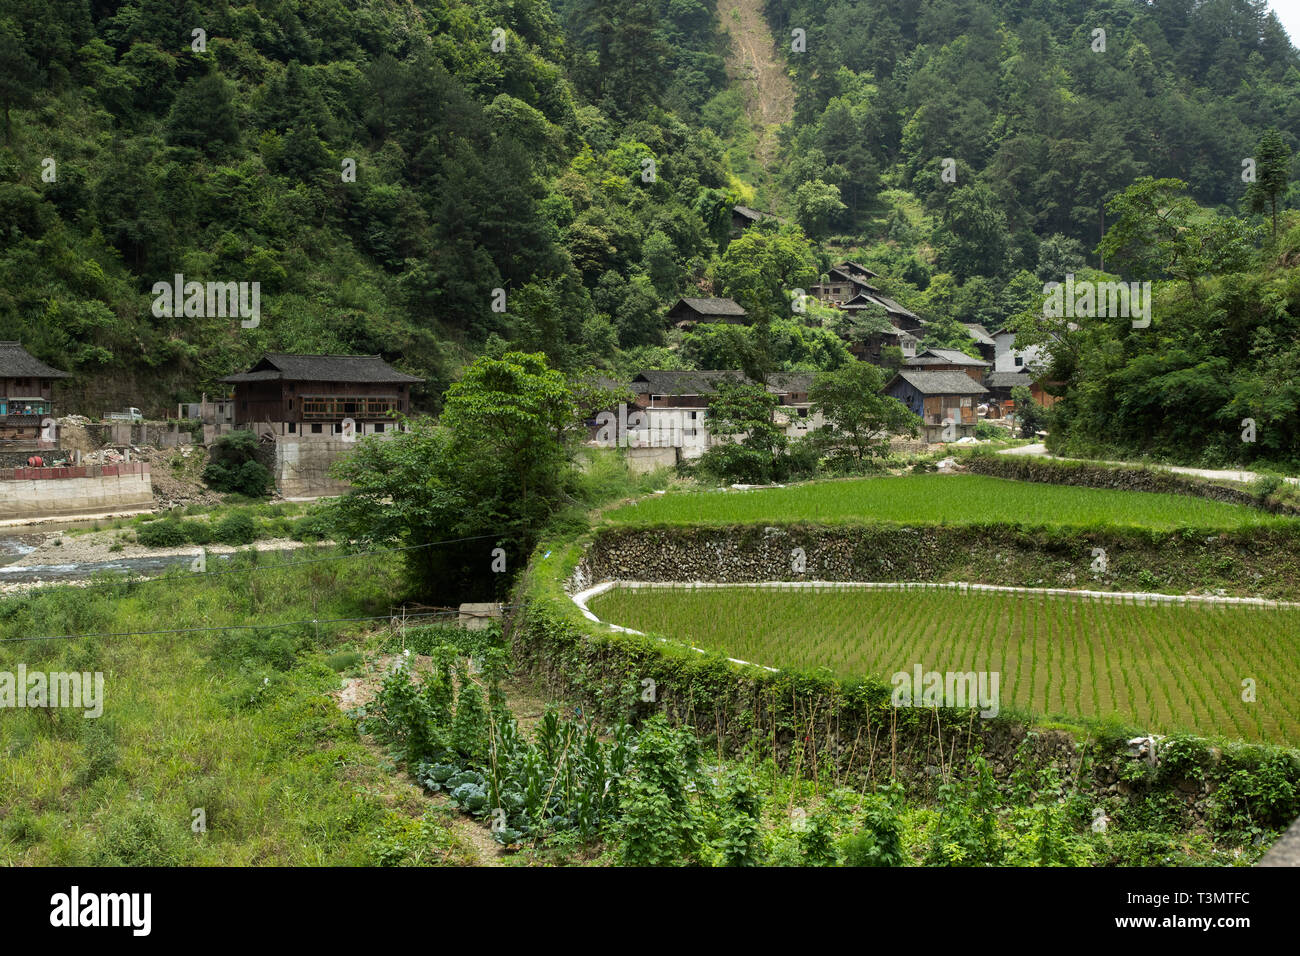 Rice paddy with the village of qingman in the background. Stock Photo